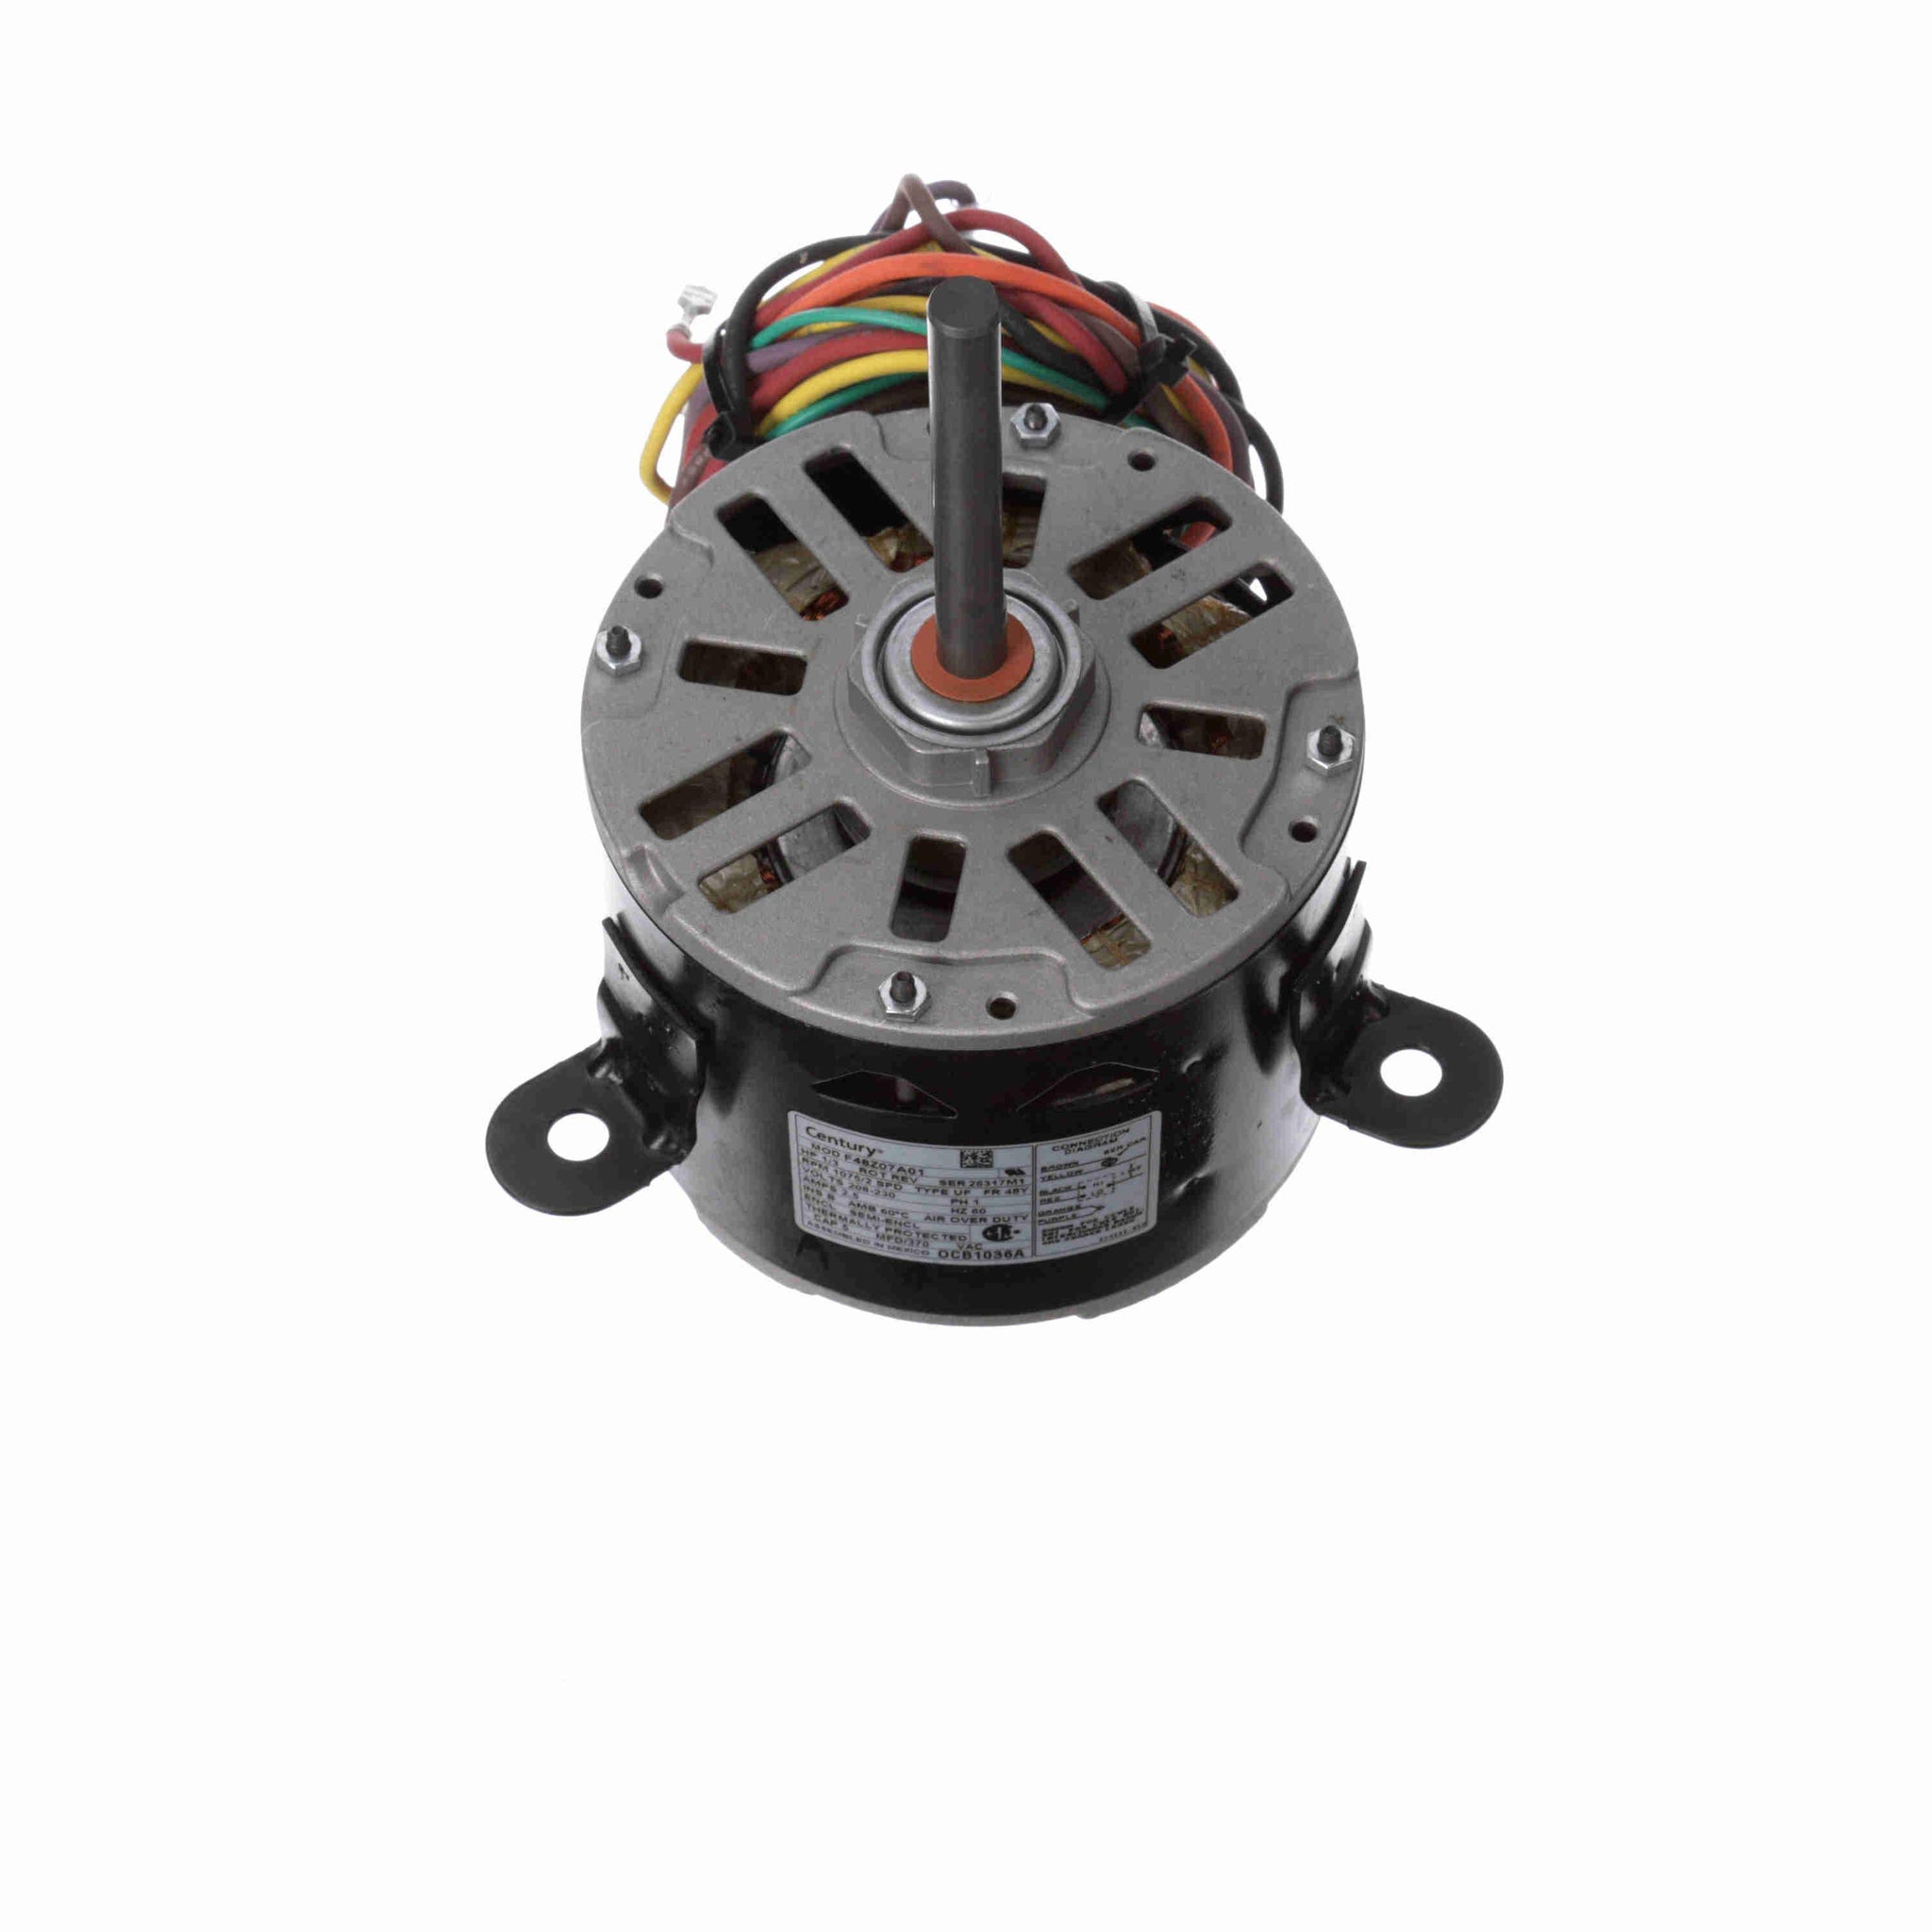 OCF1036 - 1/3 HP OEM Replacement Motor, 1075 RPM, 2 Speed, 208-230 Volts, 48 Frame, Semi Enclosed - Hardware & Moreee